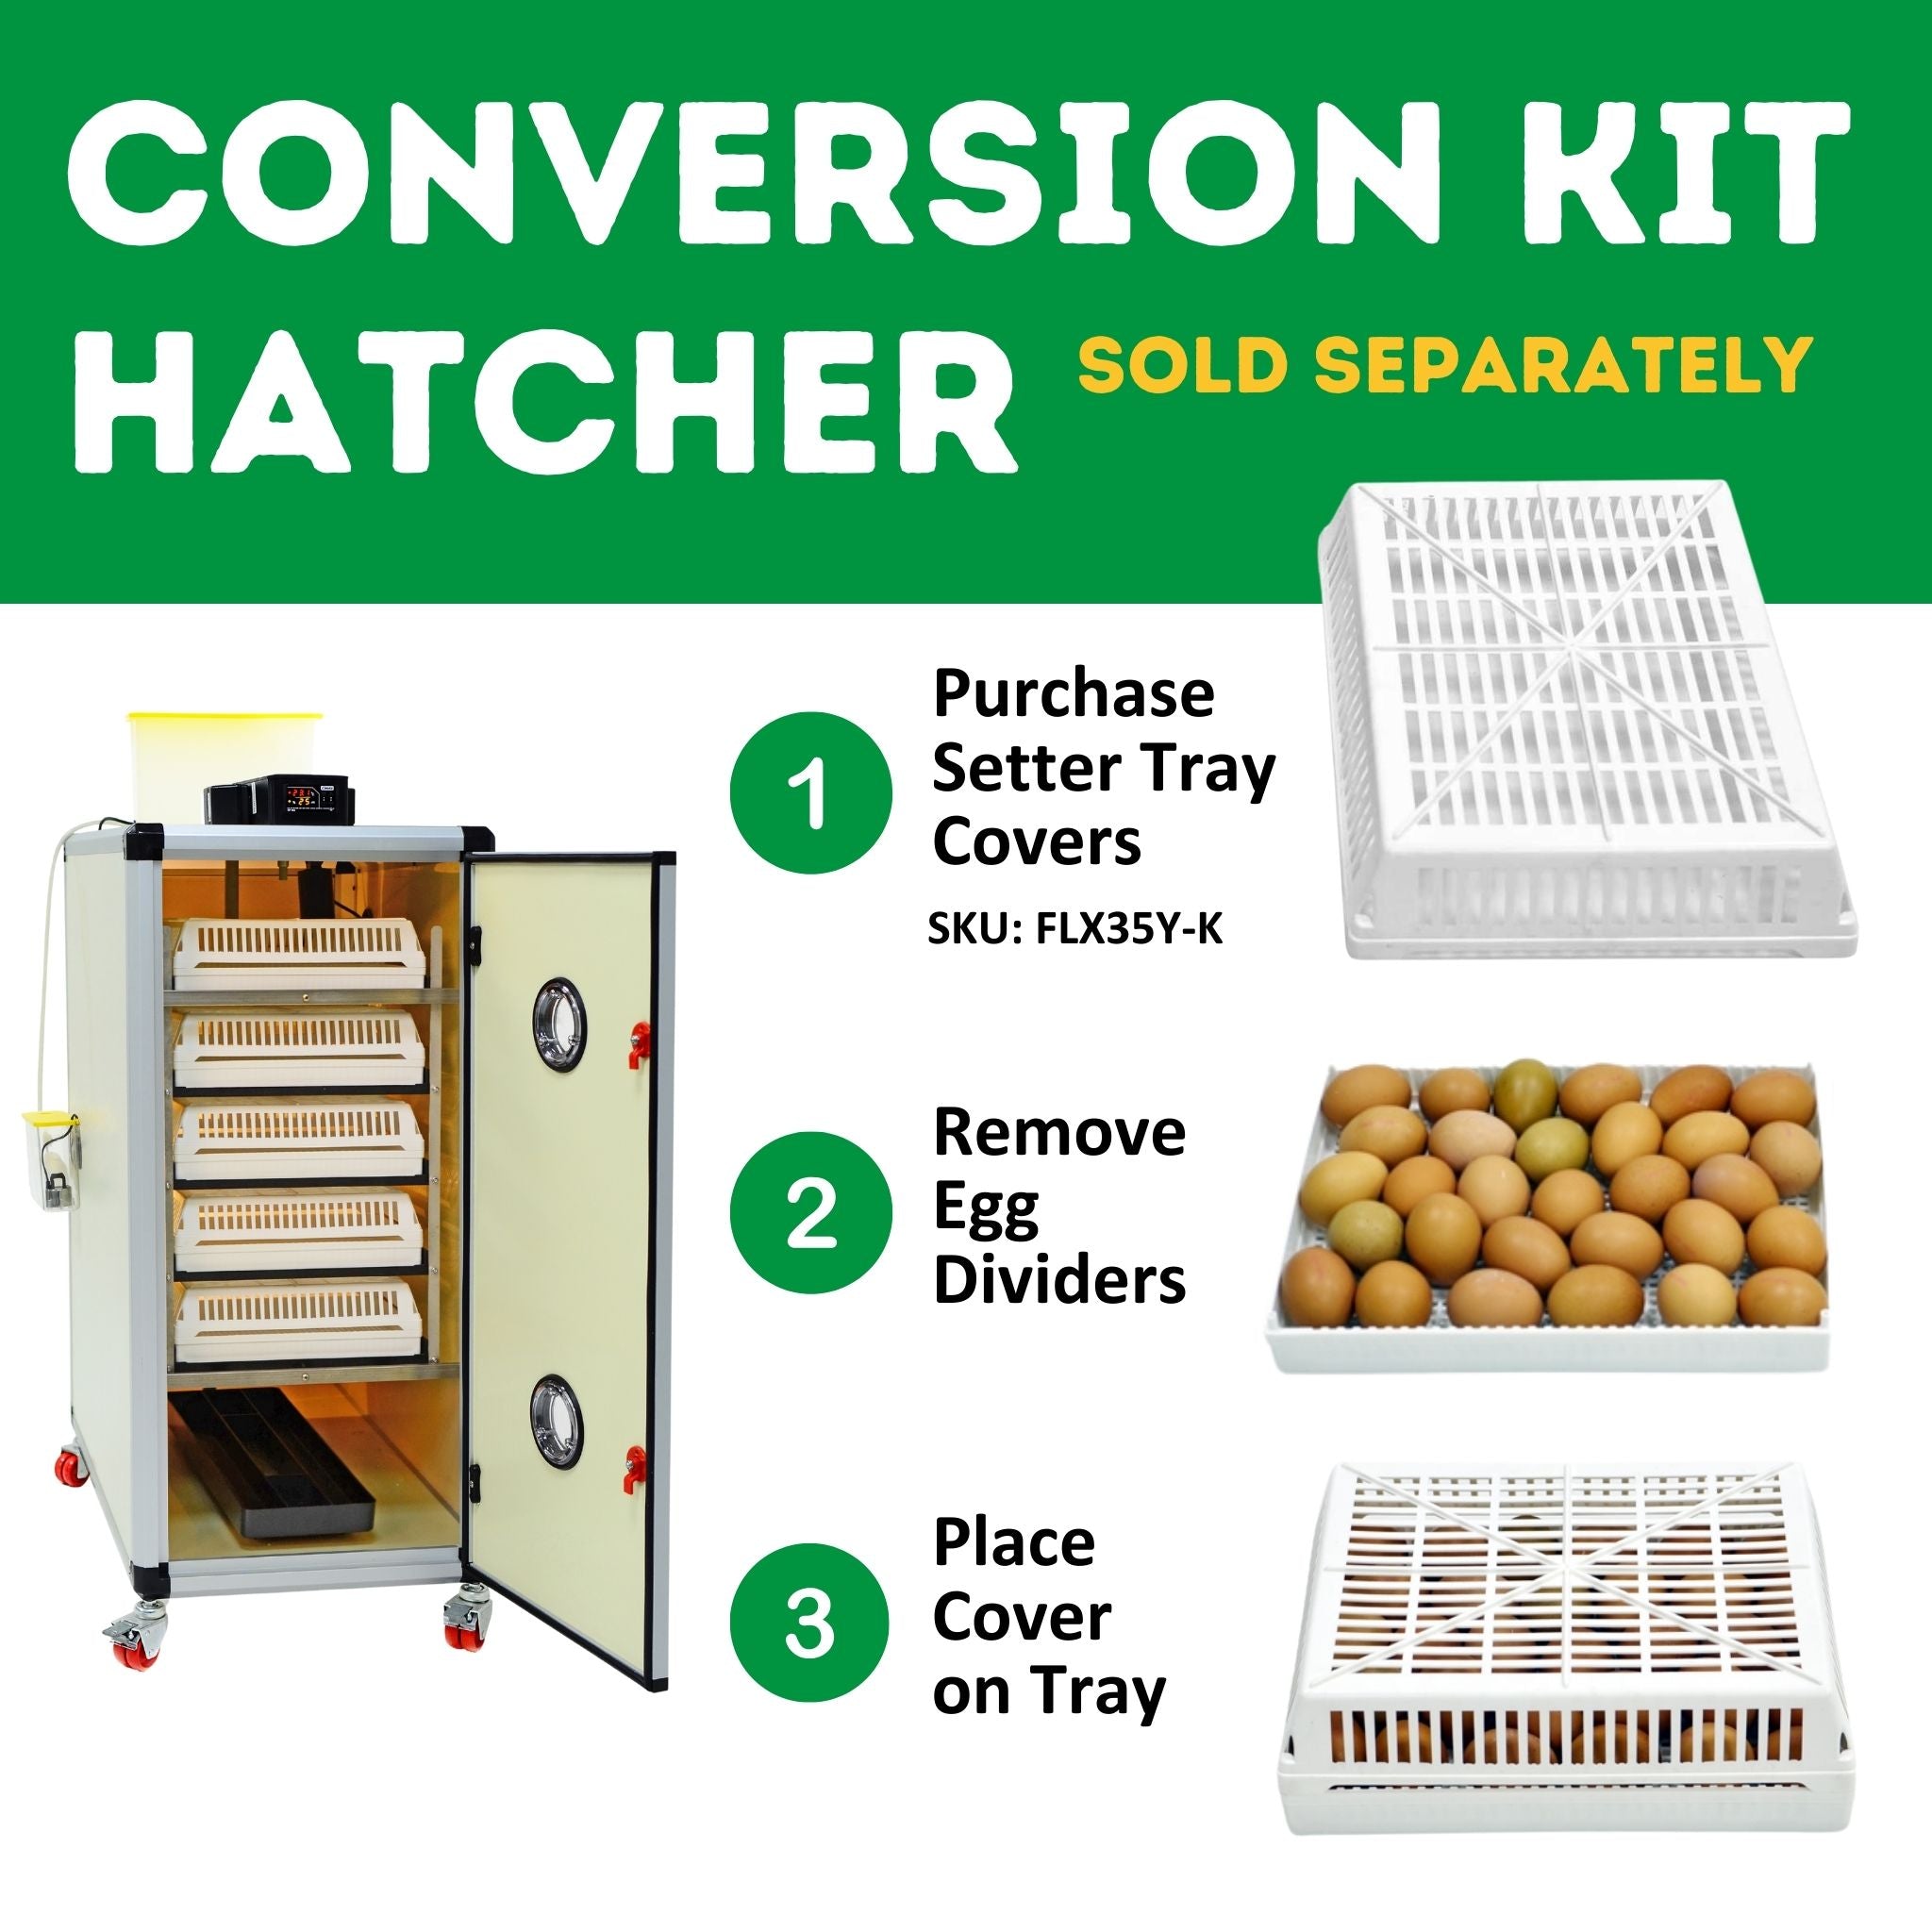 Hatching Time Cimuka. Image shows steps to apply a conversion kit for Hatcher assembly.